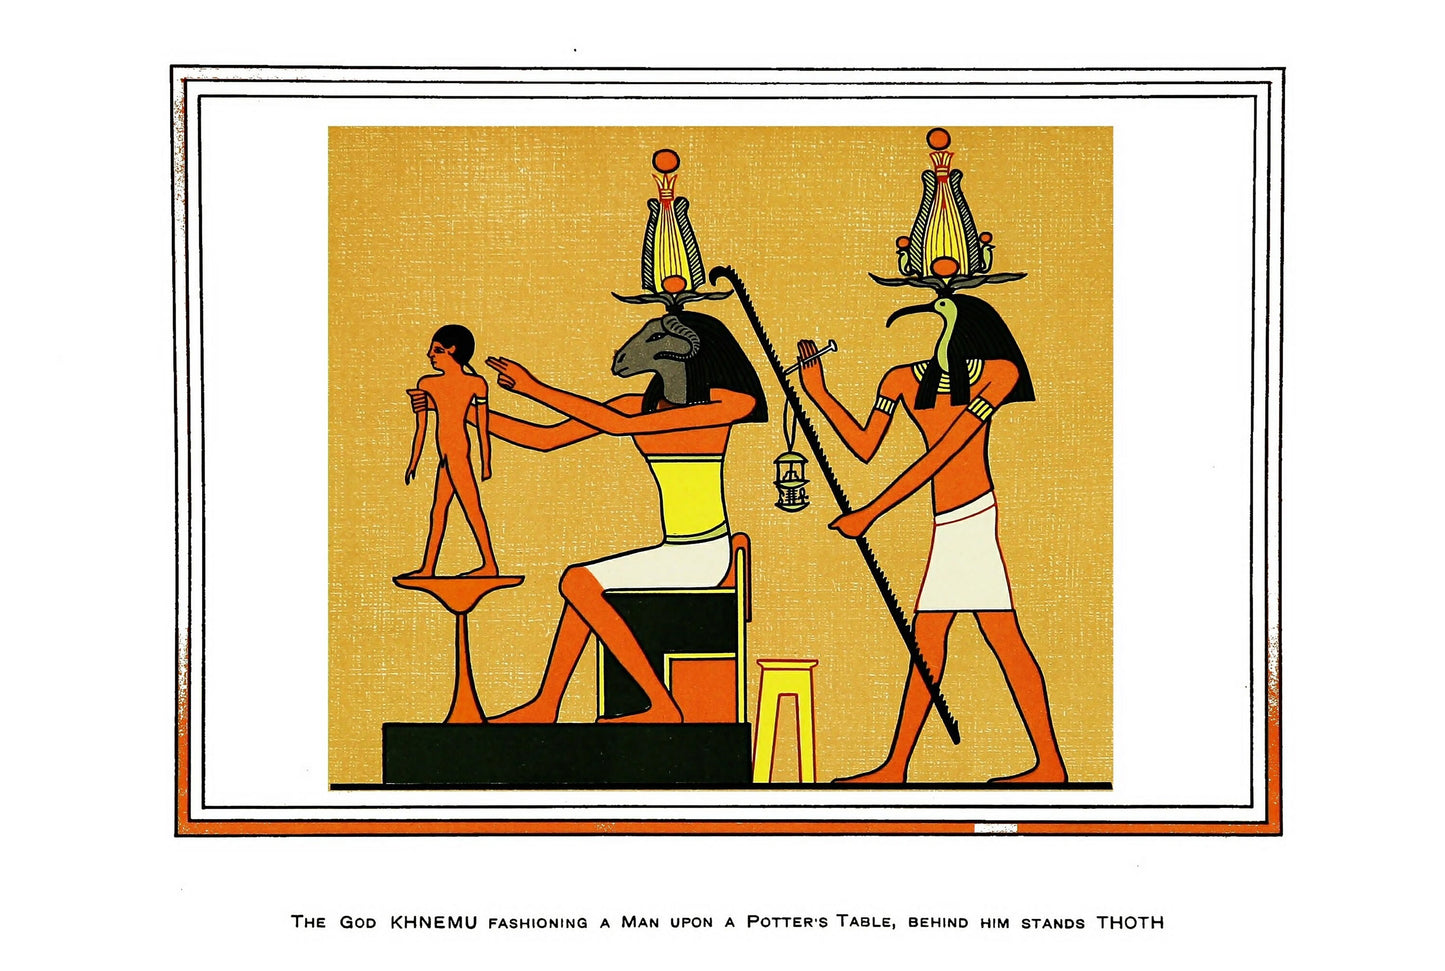 The Gods of the Ancient Egyptians [49 Images]